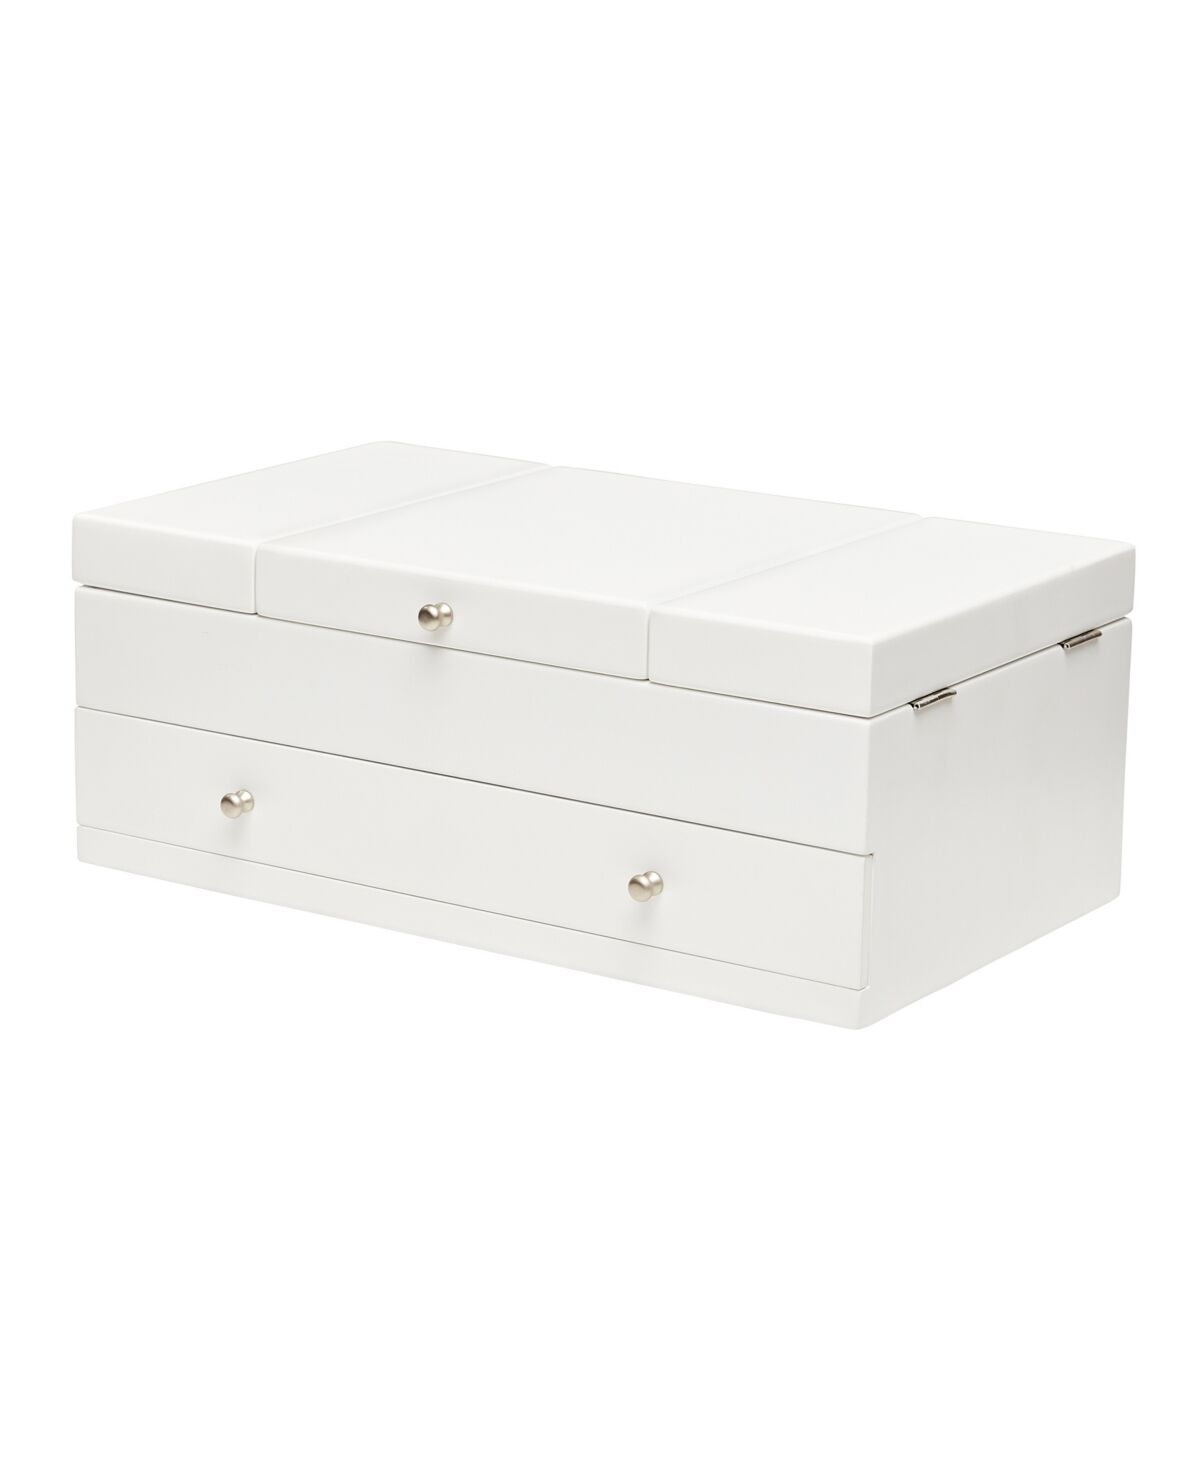 Mele & Co. Everly Wooden Triple Lid Jewelry Box - White